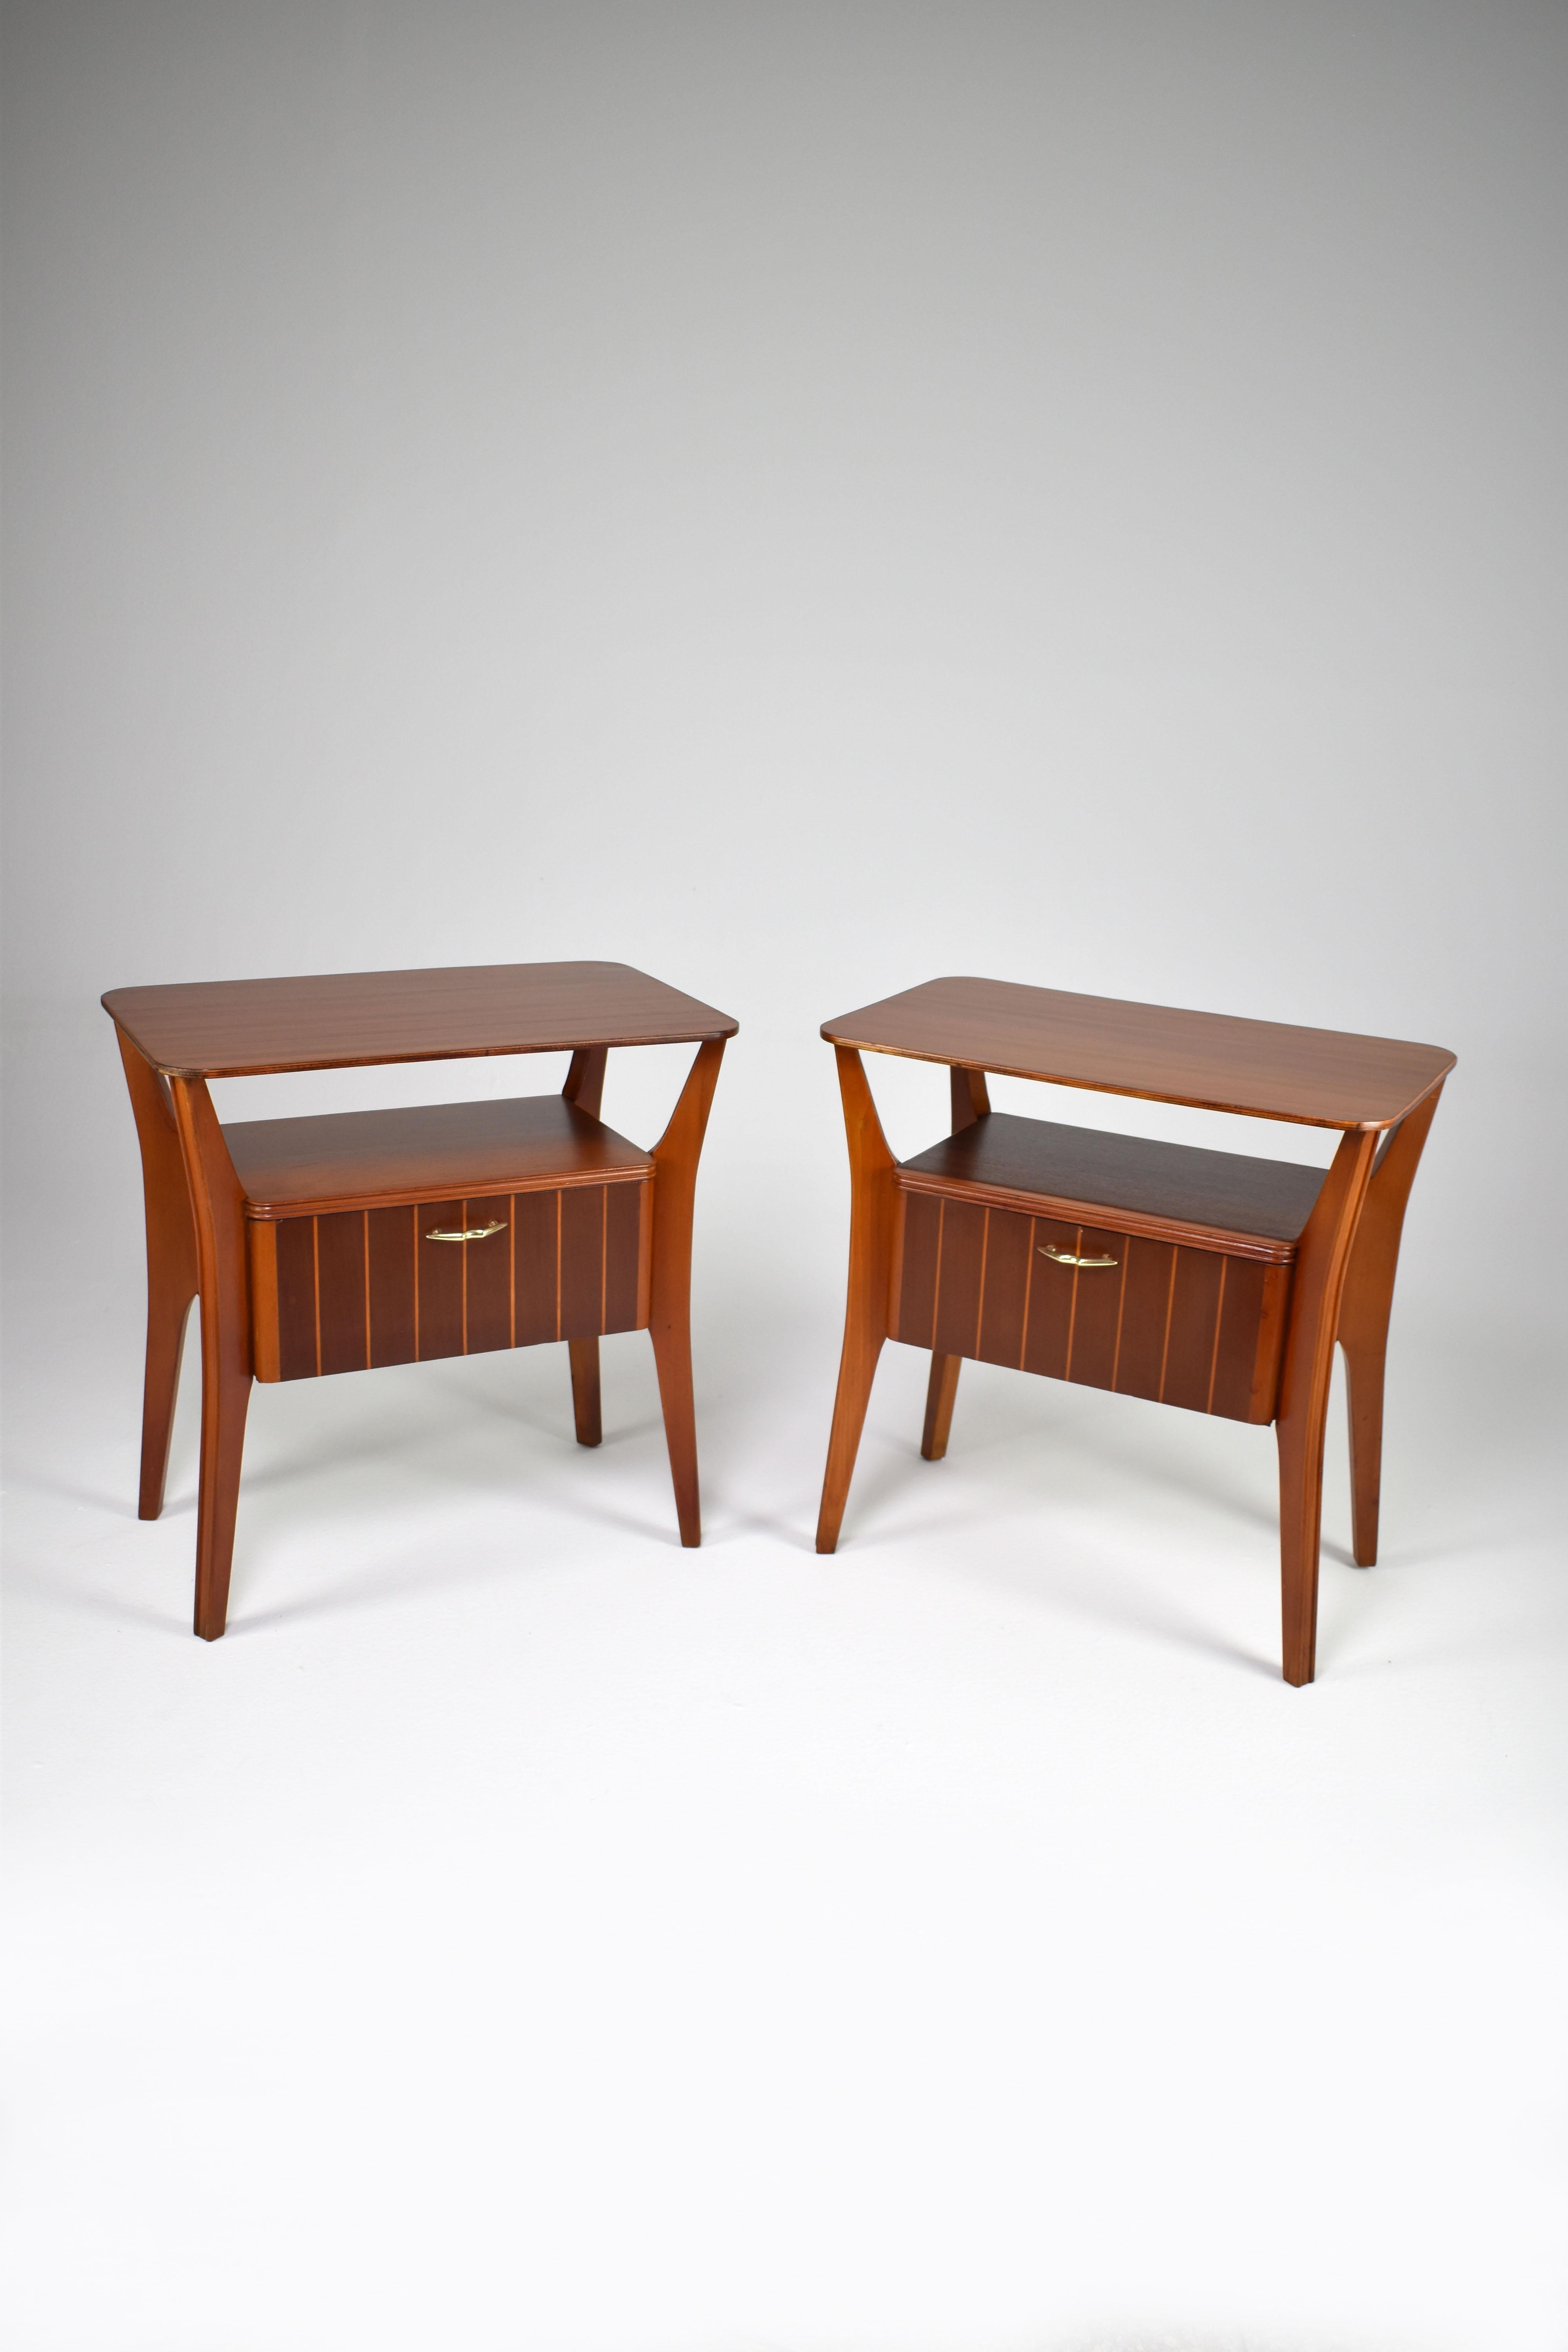 Pair of Italian Maple Nightstands Attributed to Gio Ponti for Cantu, 1950s For Sale 1